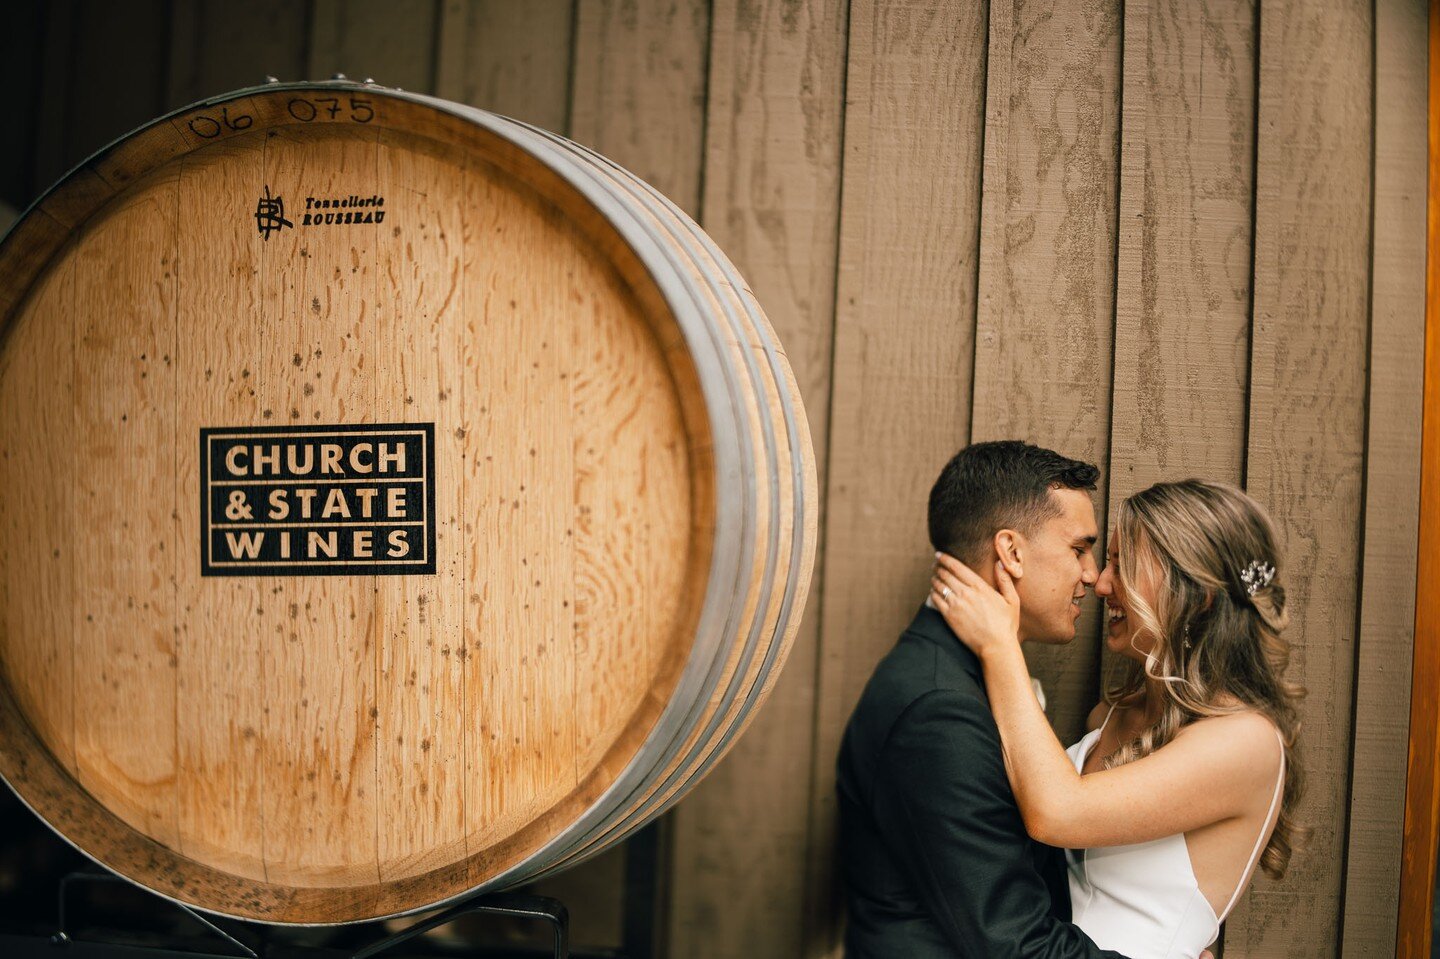 @churchandstatewines always brings their A game

#victoriabcwedding #churchandstatewines #churchandstatewedding #churchandstatewineswedding #churchandstatewinerywedding #ourcoastalcollective #vancouverislandwedding #vancouverislandweddingphotographer